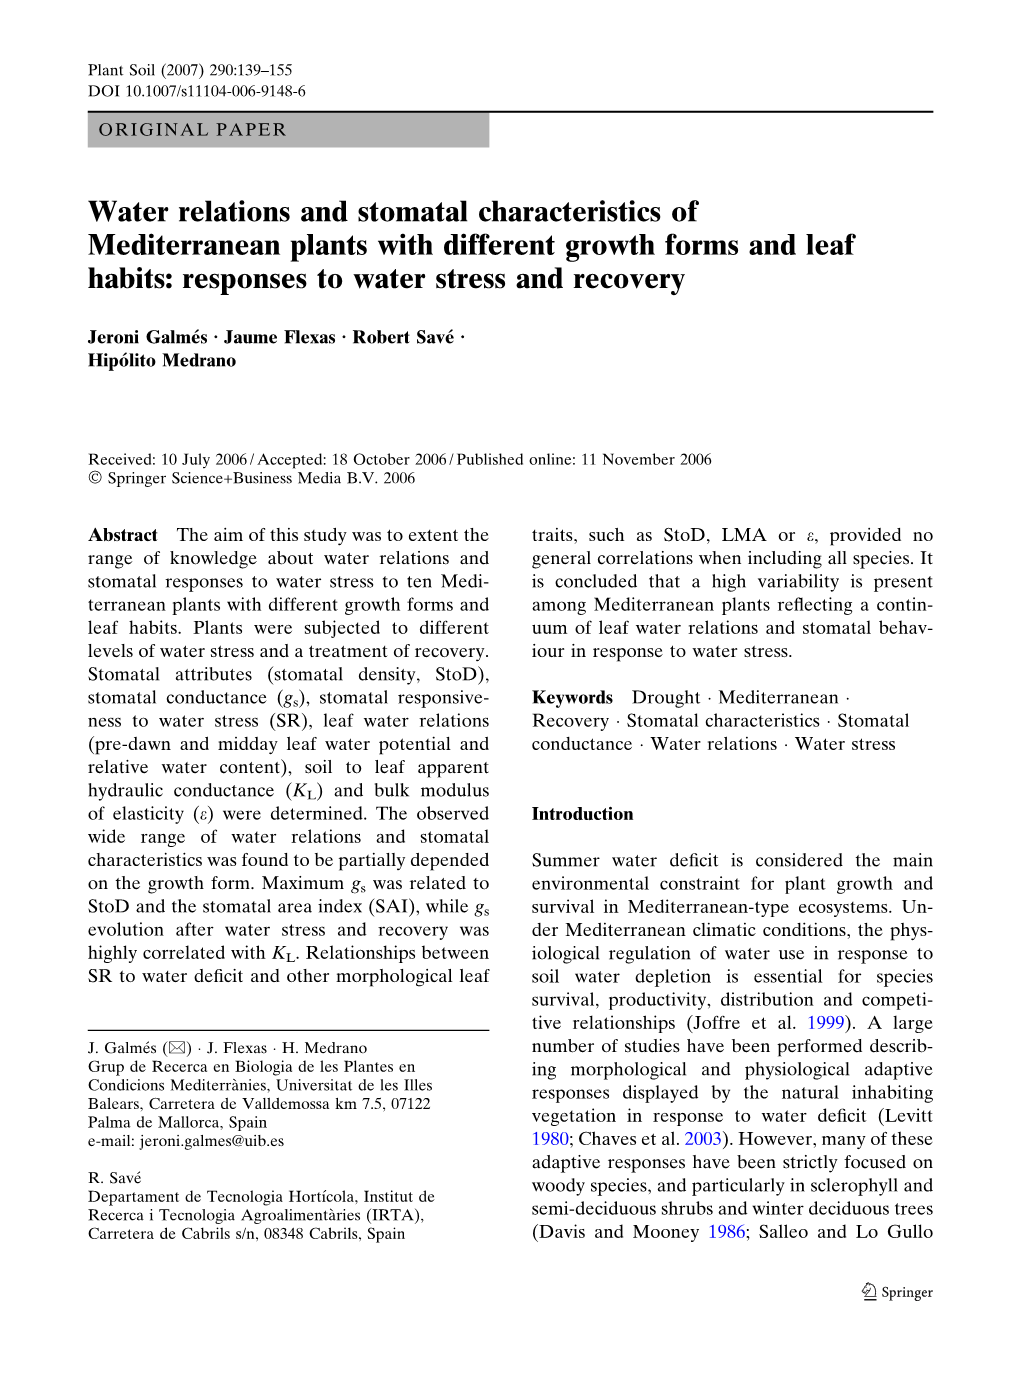 Water Relations and Stomatal Characteristics of Mediterranean Plants with Different Growth Forms and Leaf Habits: Responses to Water Stress and Recovery